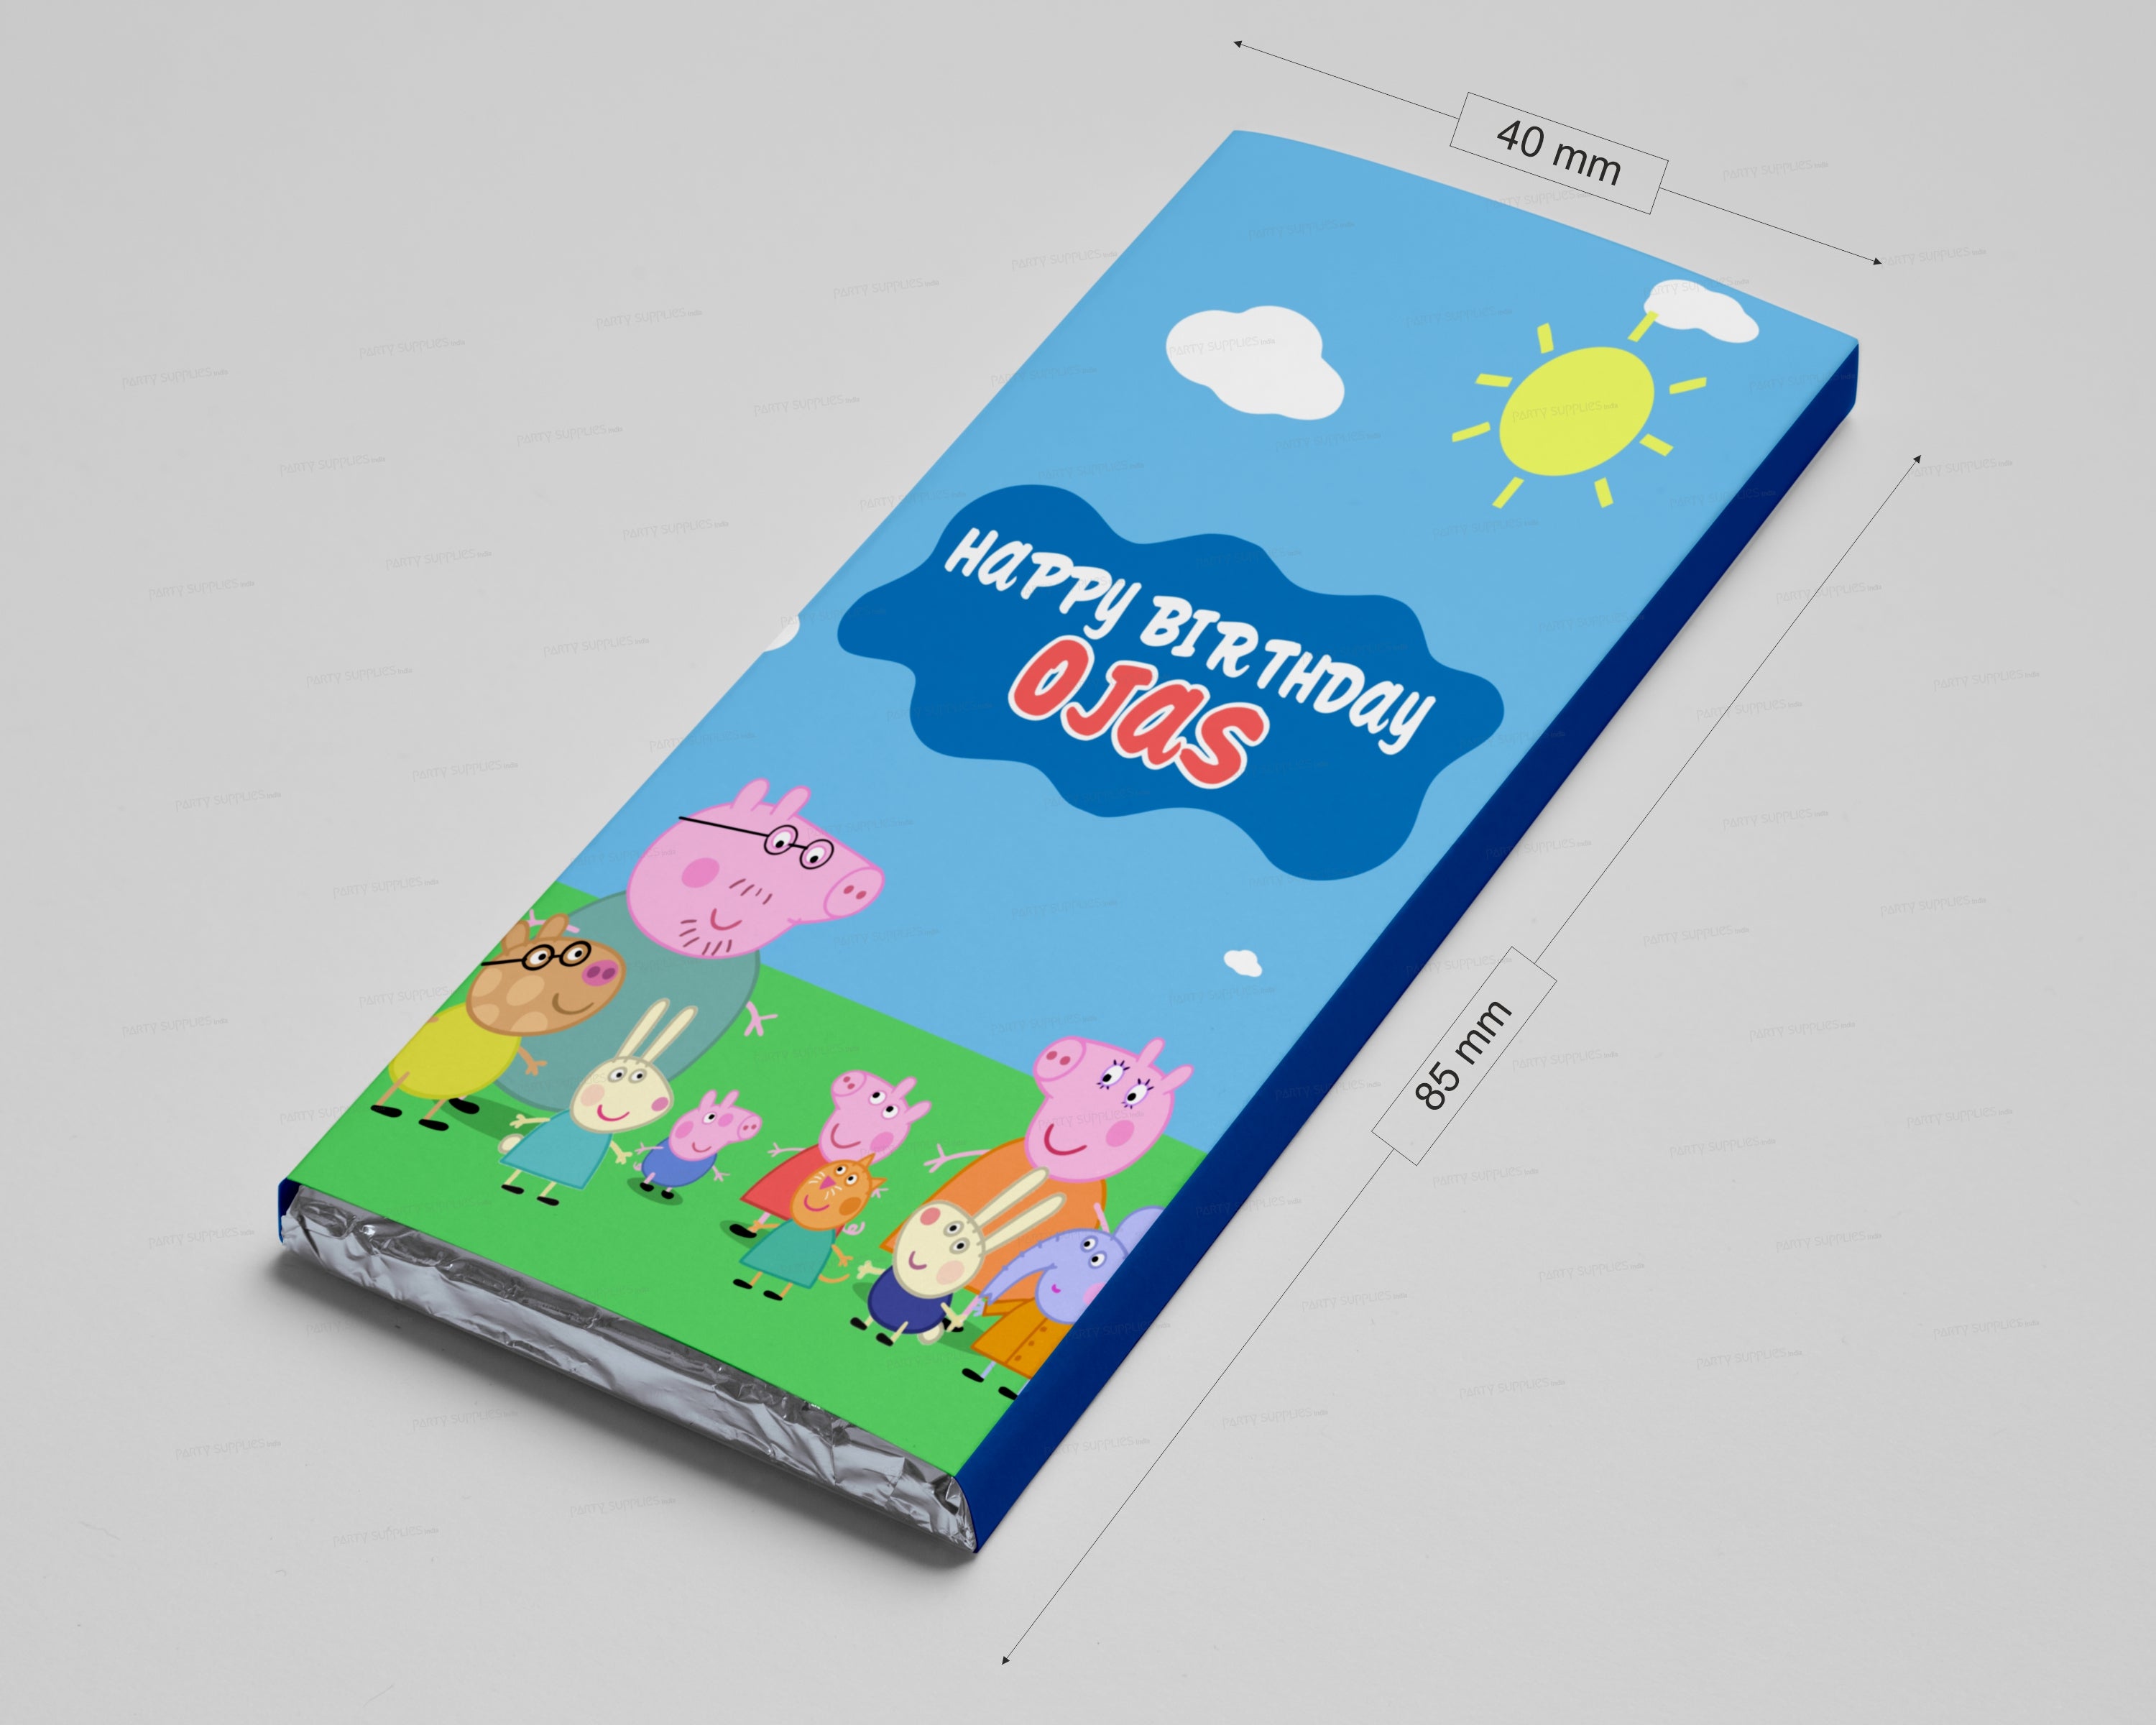 Prakruthi Pulp Art Gift Paper Bag Peppa Pig theme for Kids Birthday Party,  Baby Shower Presents, Return Gifts - 8